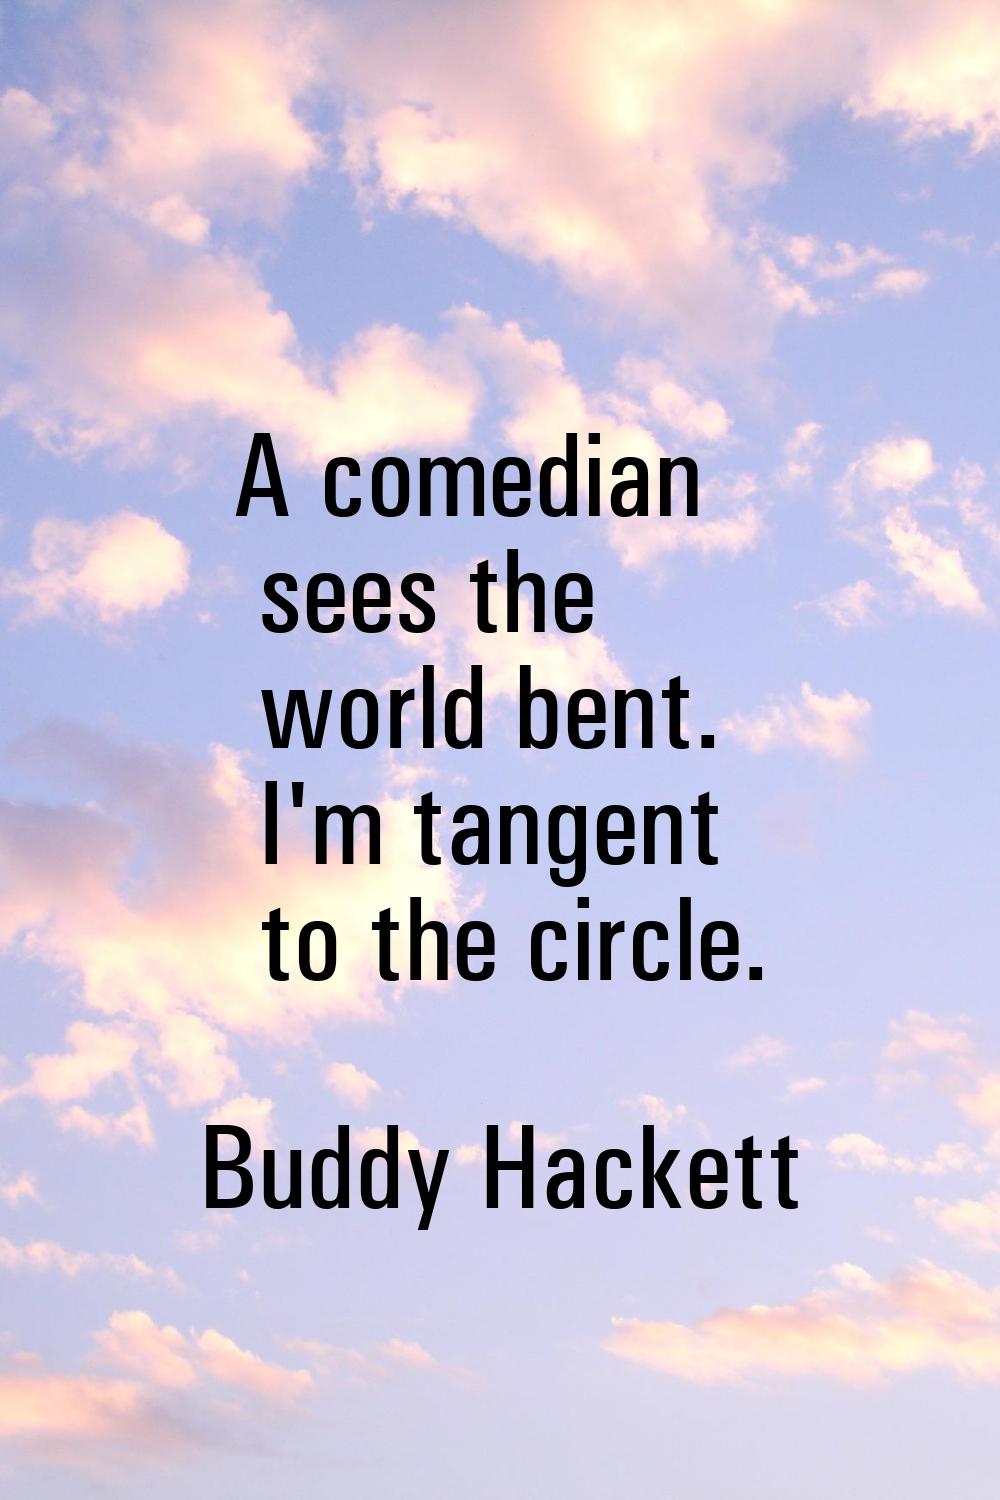 A comedian sees the world bent. I'm tangent to the circle.